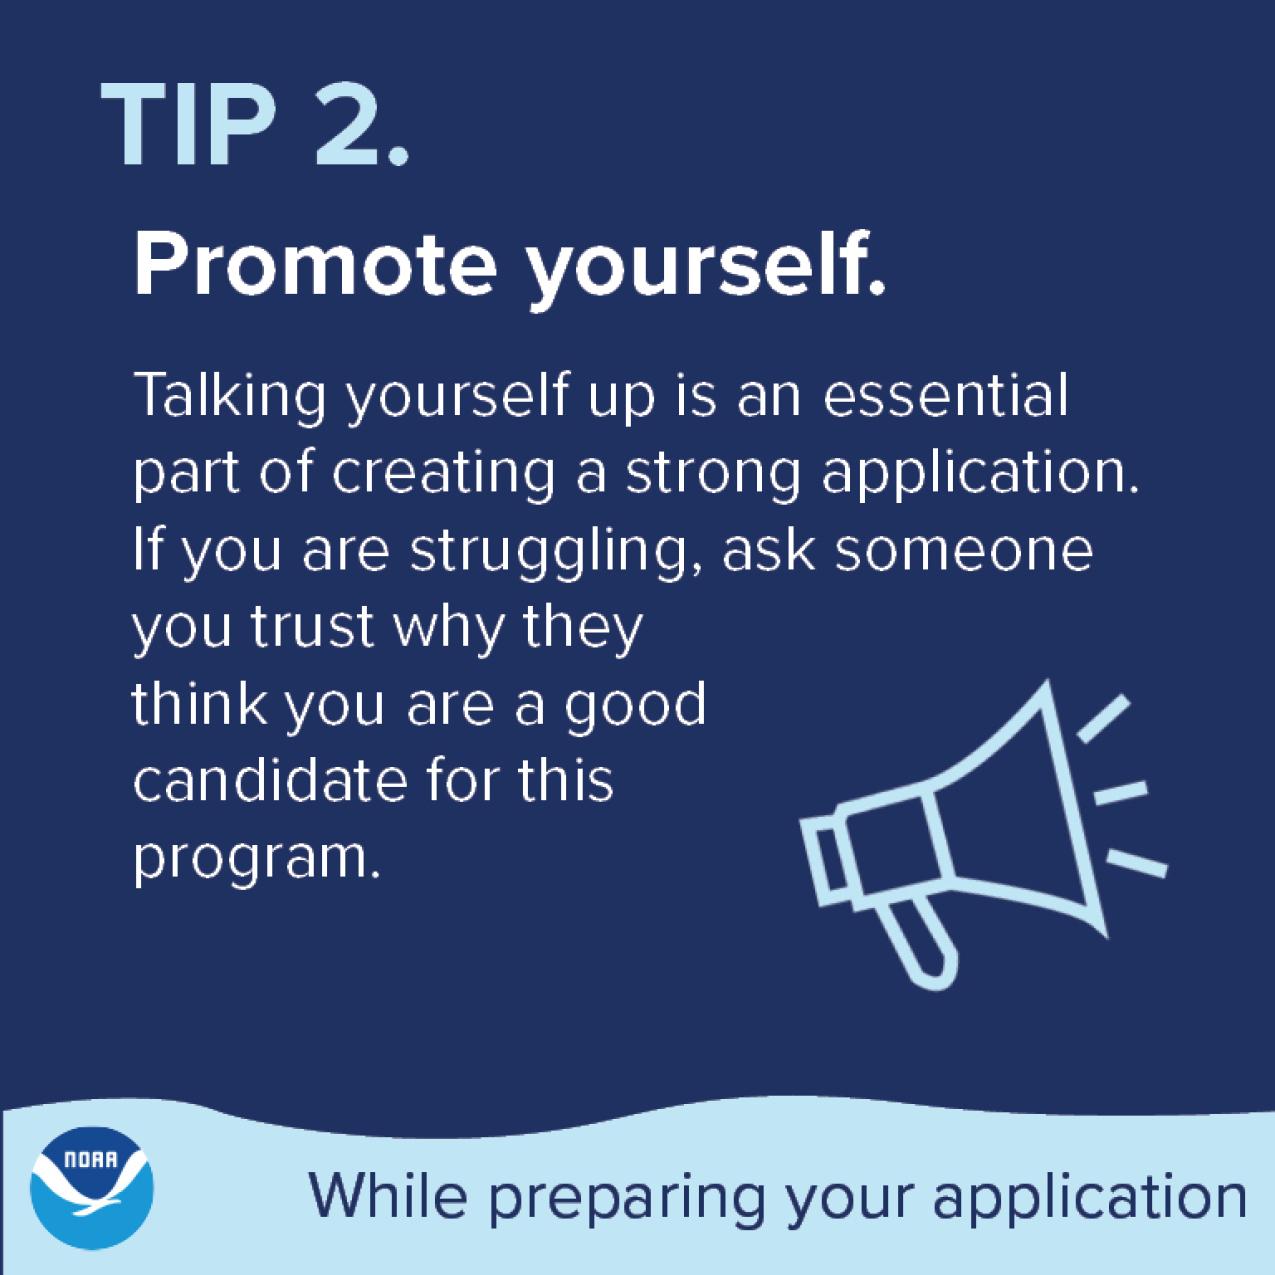 Tip 2. Promote yourself. Talking yourself up is an essential part of creating a strong application. If you are struggling, ask someone you trust why they think you are a good candidate for this program.